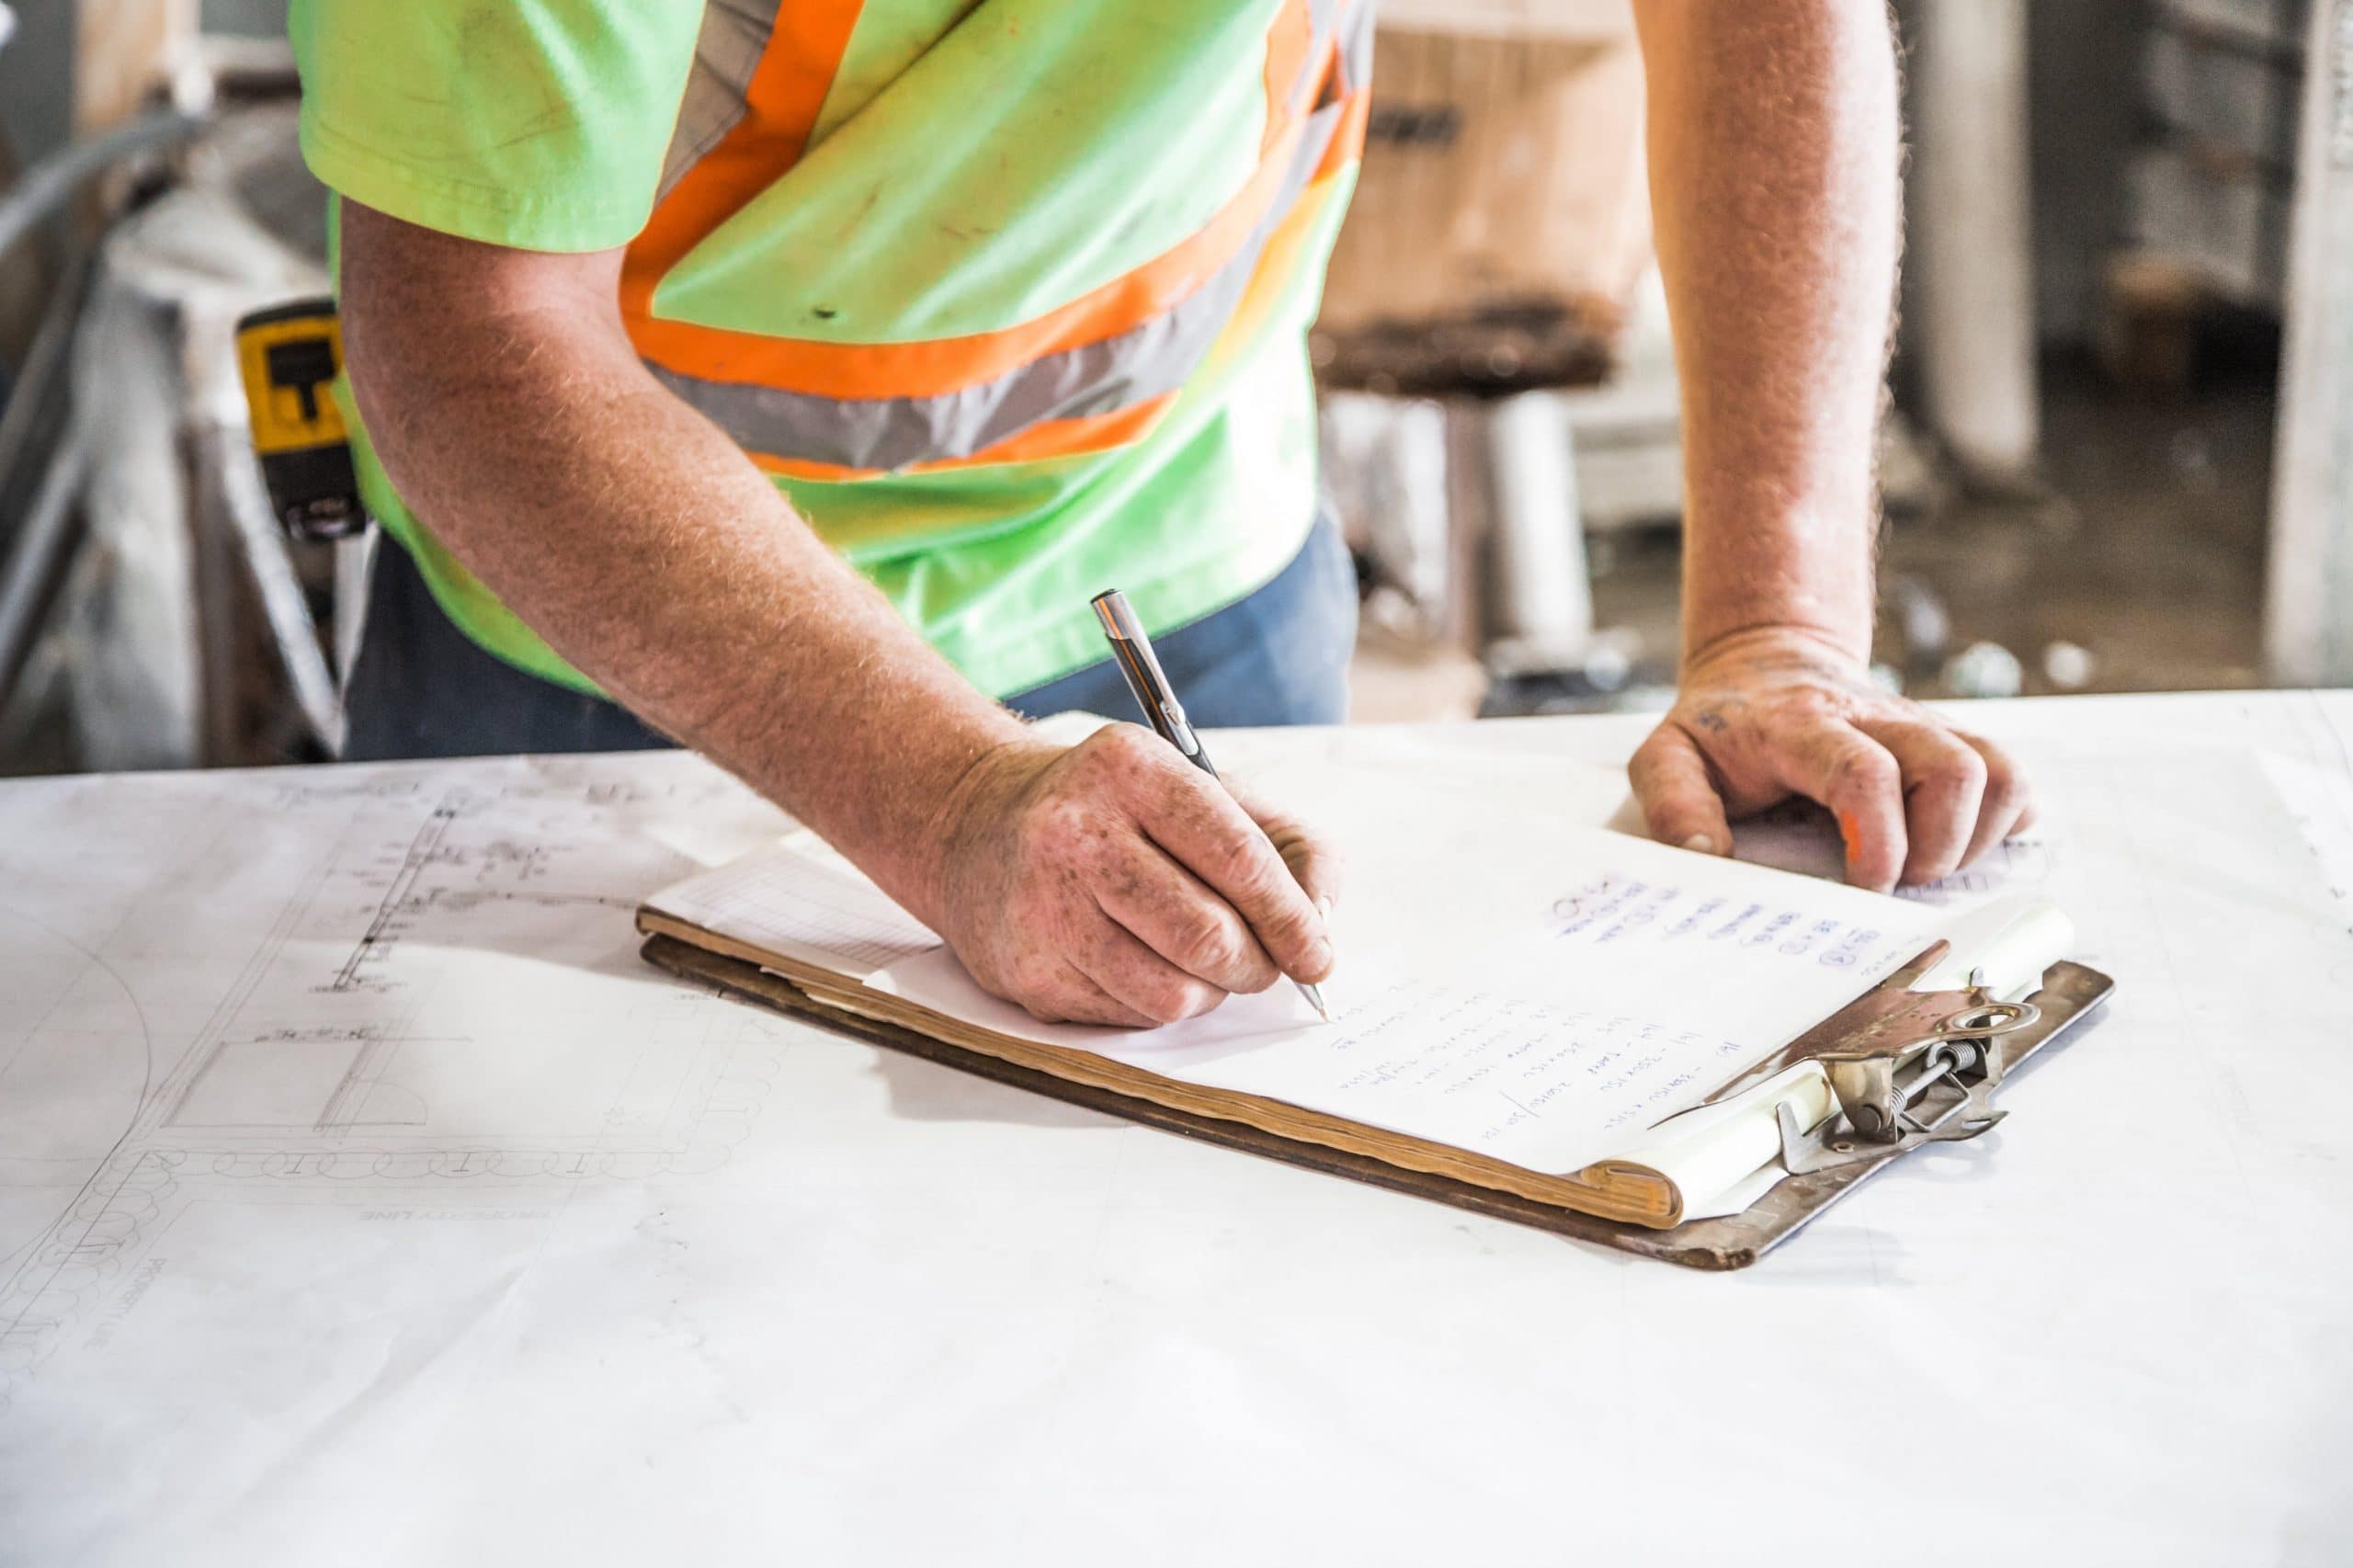 Workers’ Compensation Laws in New York